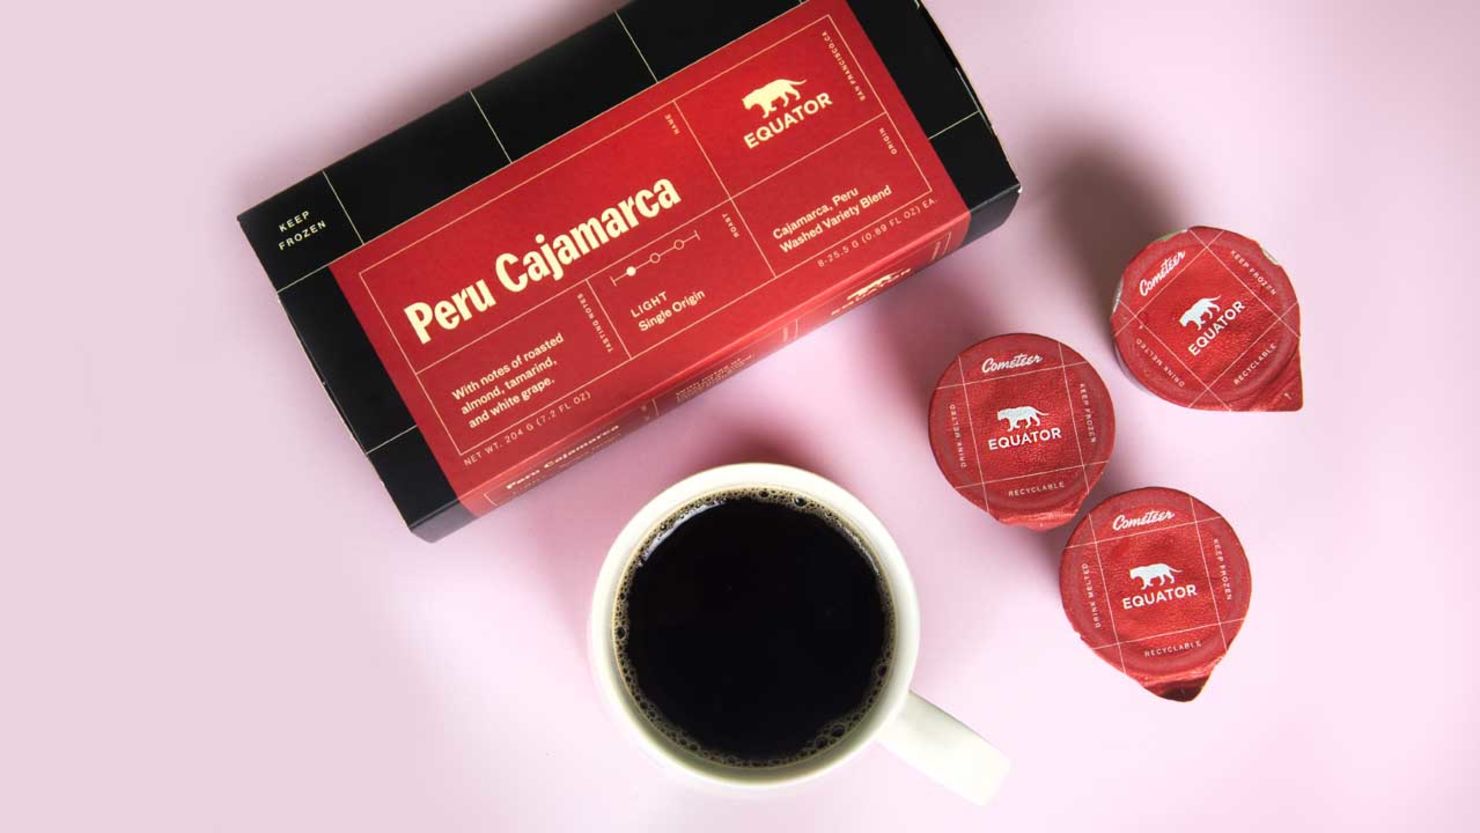 Cometeer coffee review: A worthwhile coffee subscription